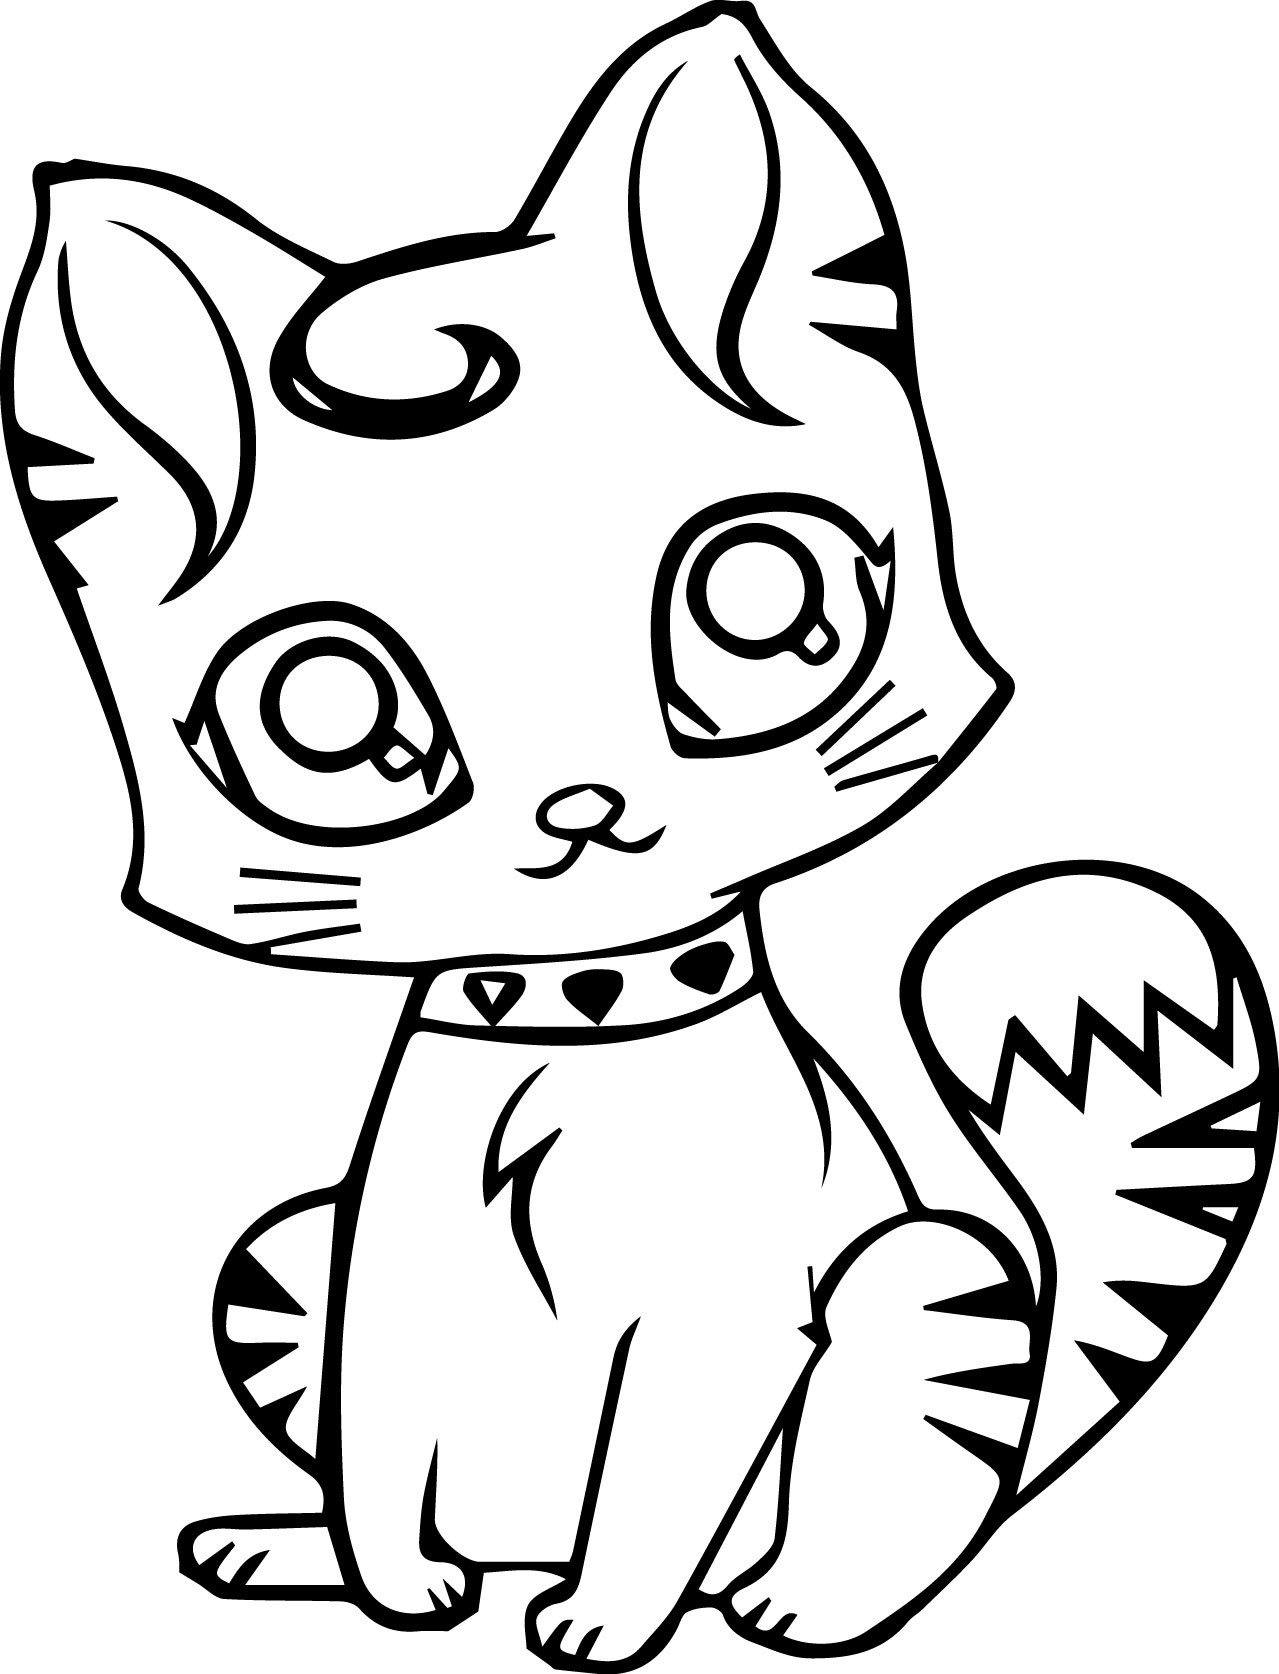 Kawaii Cat Girl Coloring Pages
 Cute Cat Coloring Pages coloringsuite